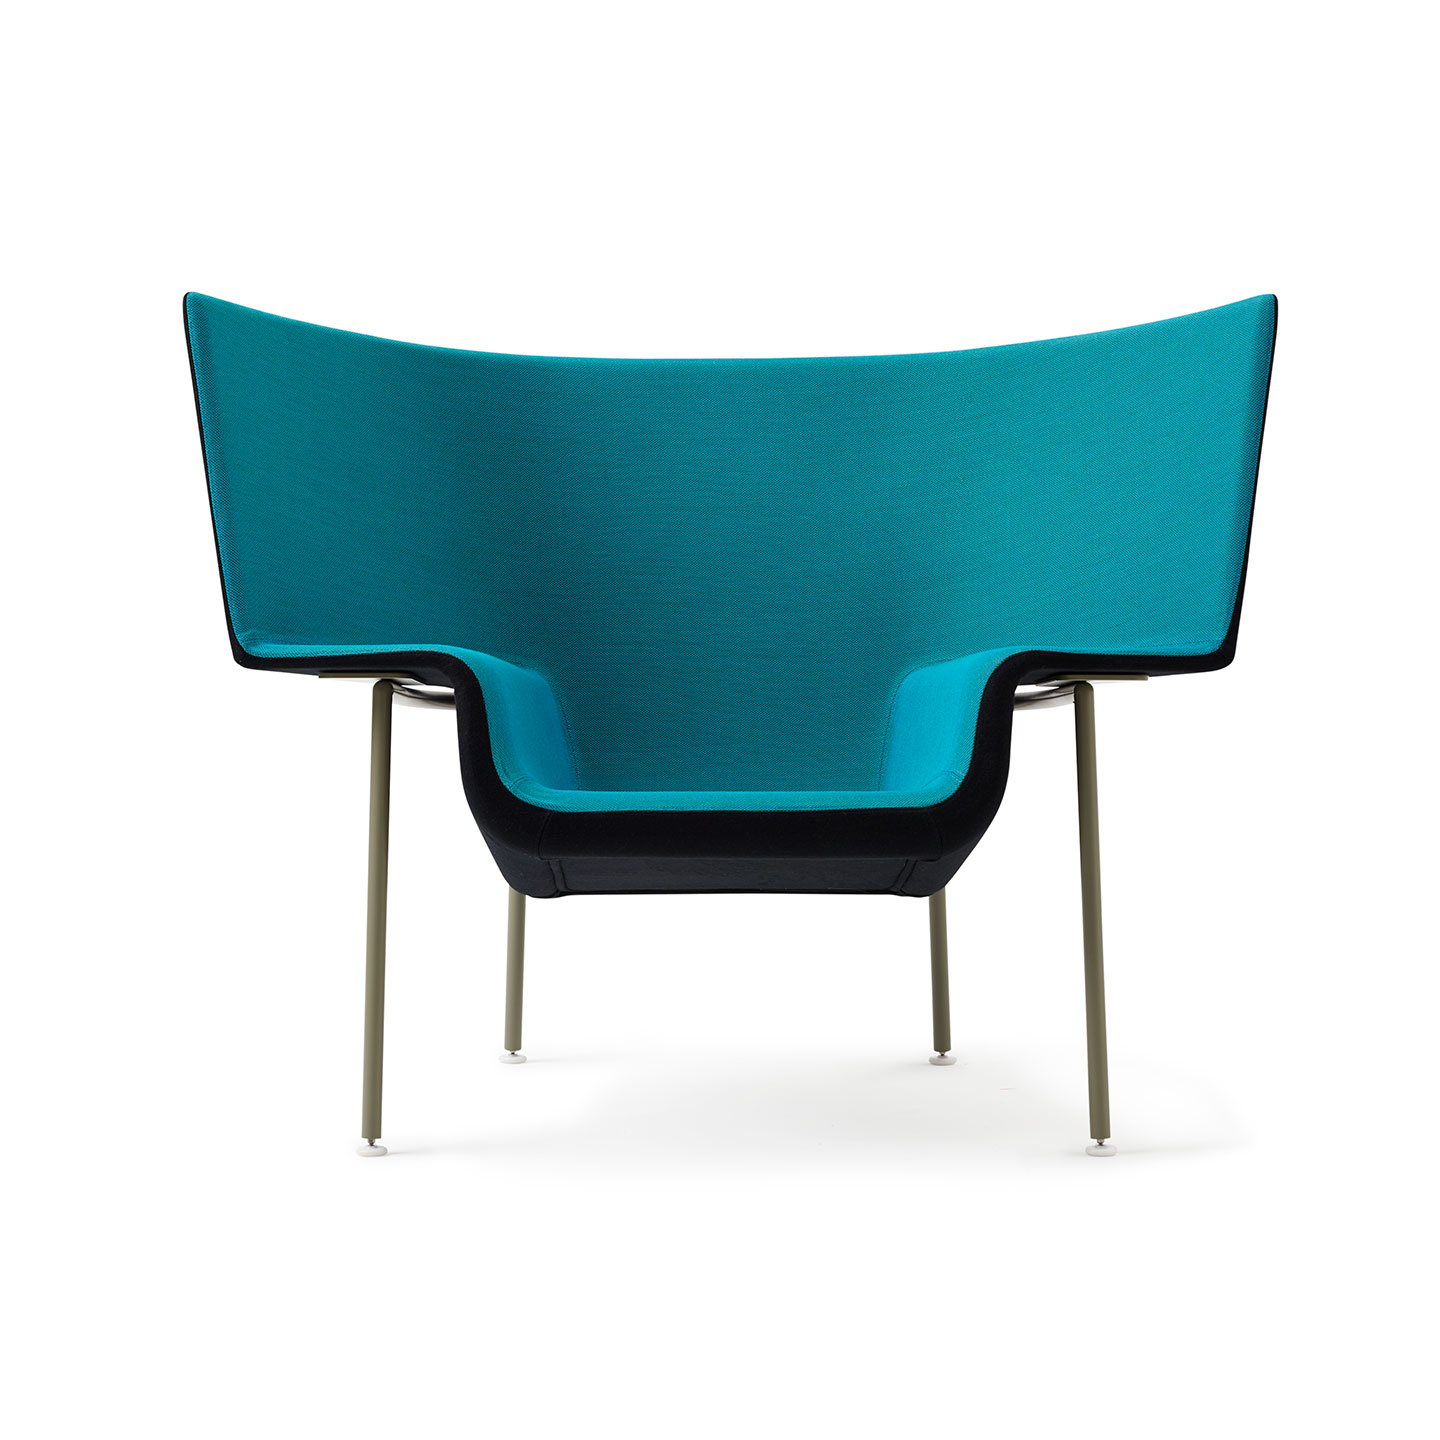 Haworth Capo lounge chair in black and teal color with double hand rest 